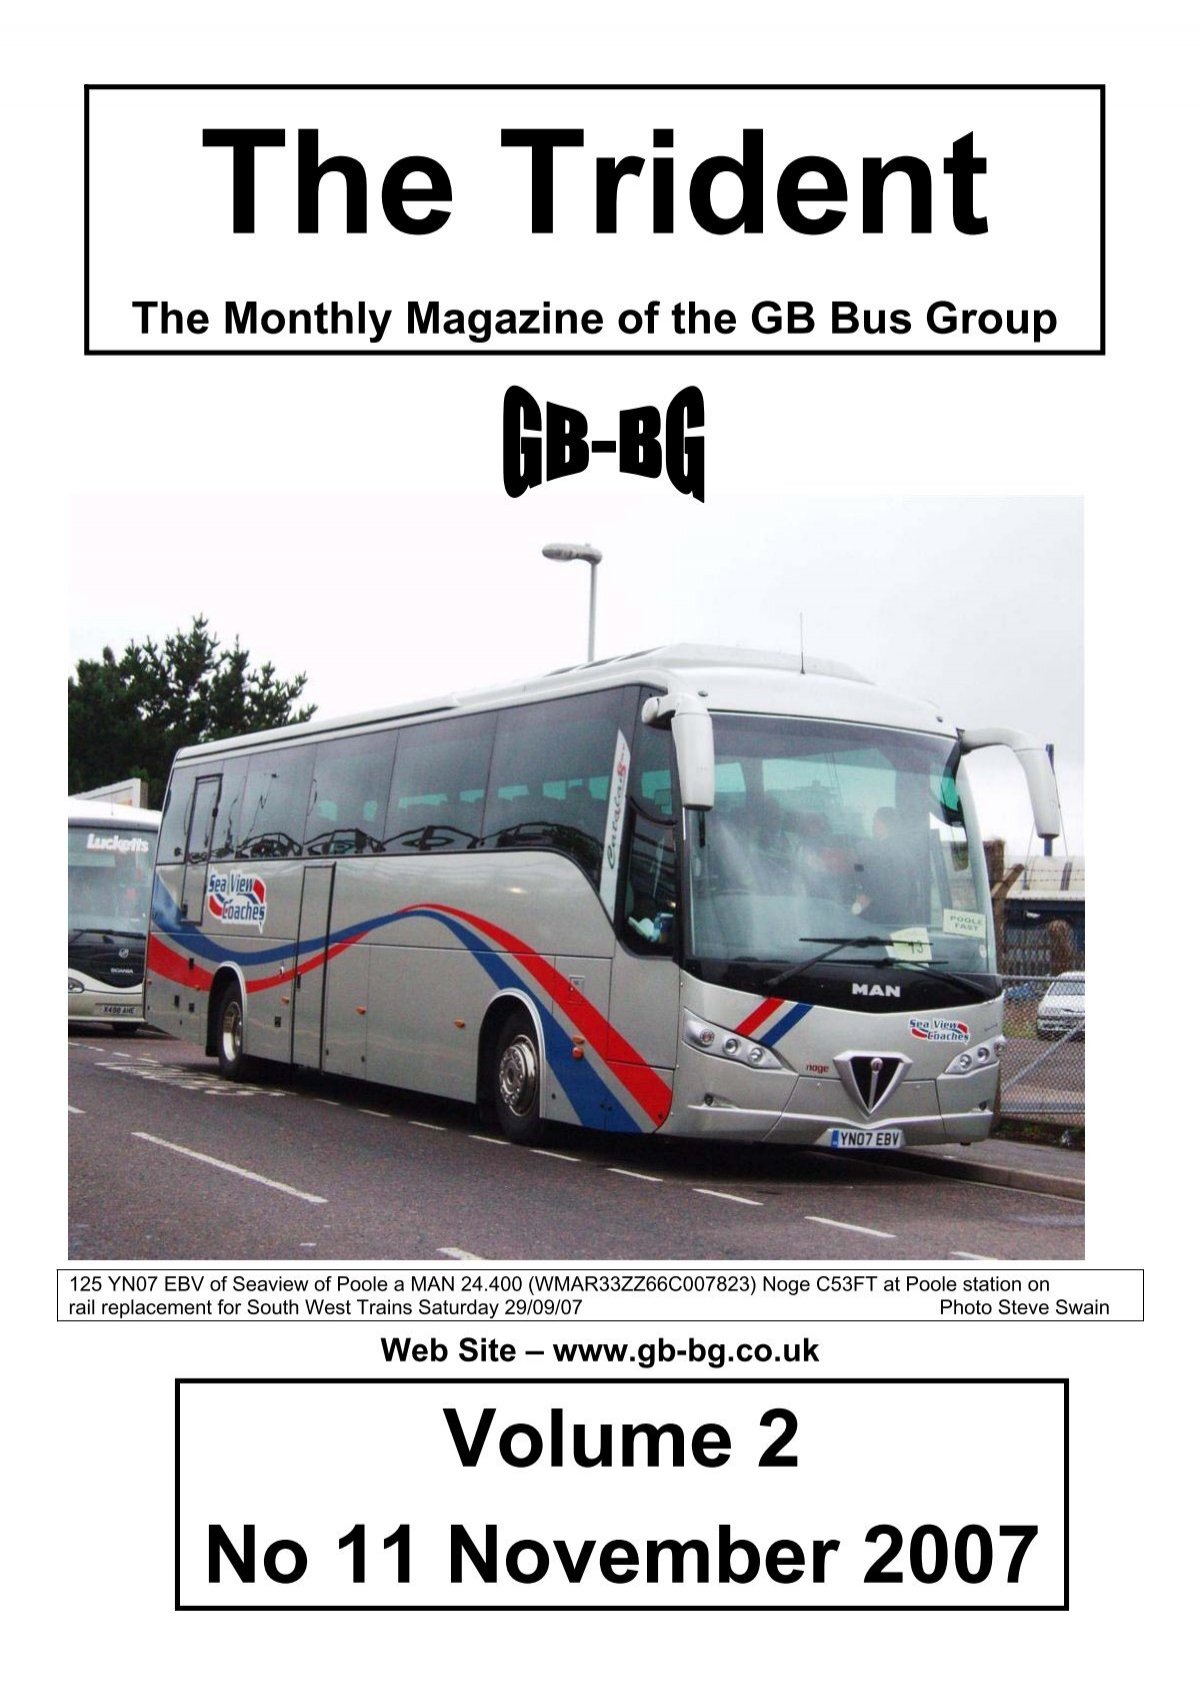 Omnibus Magazine: 125 years of buses – Mercedes-Benz Buses